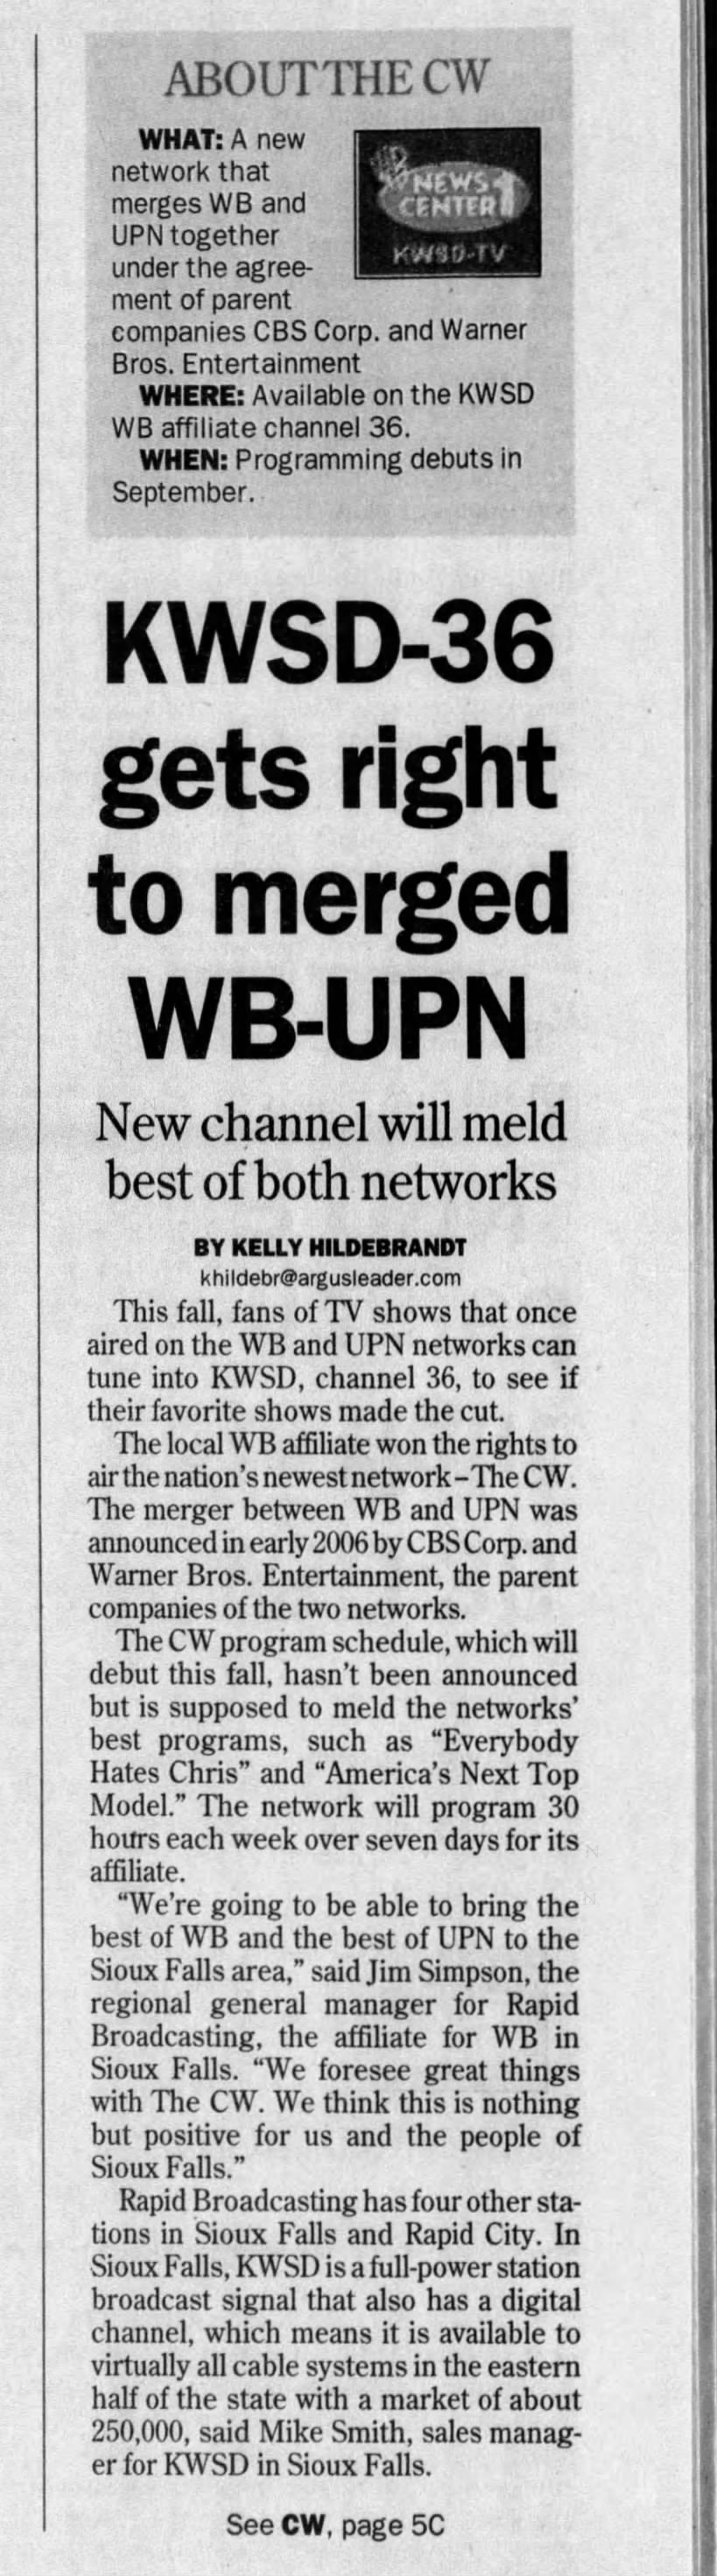 KWSD-36 gets right to merged WB-UPN